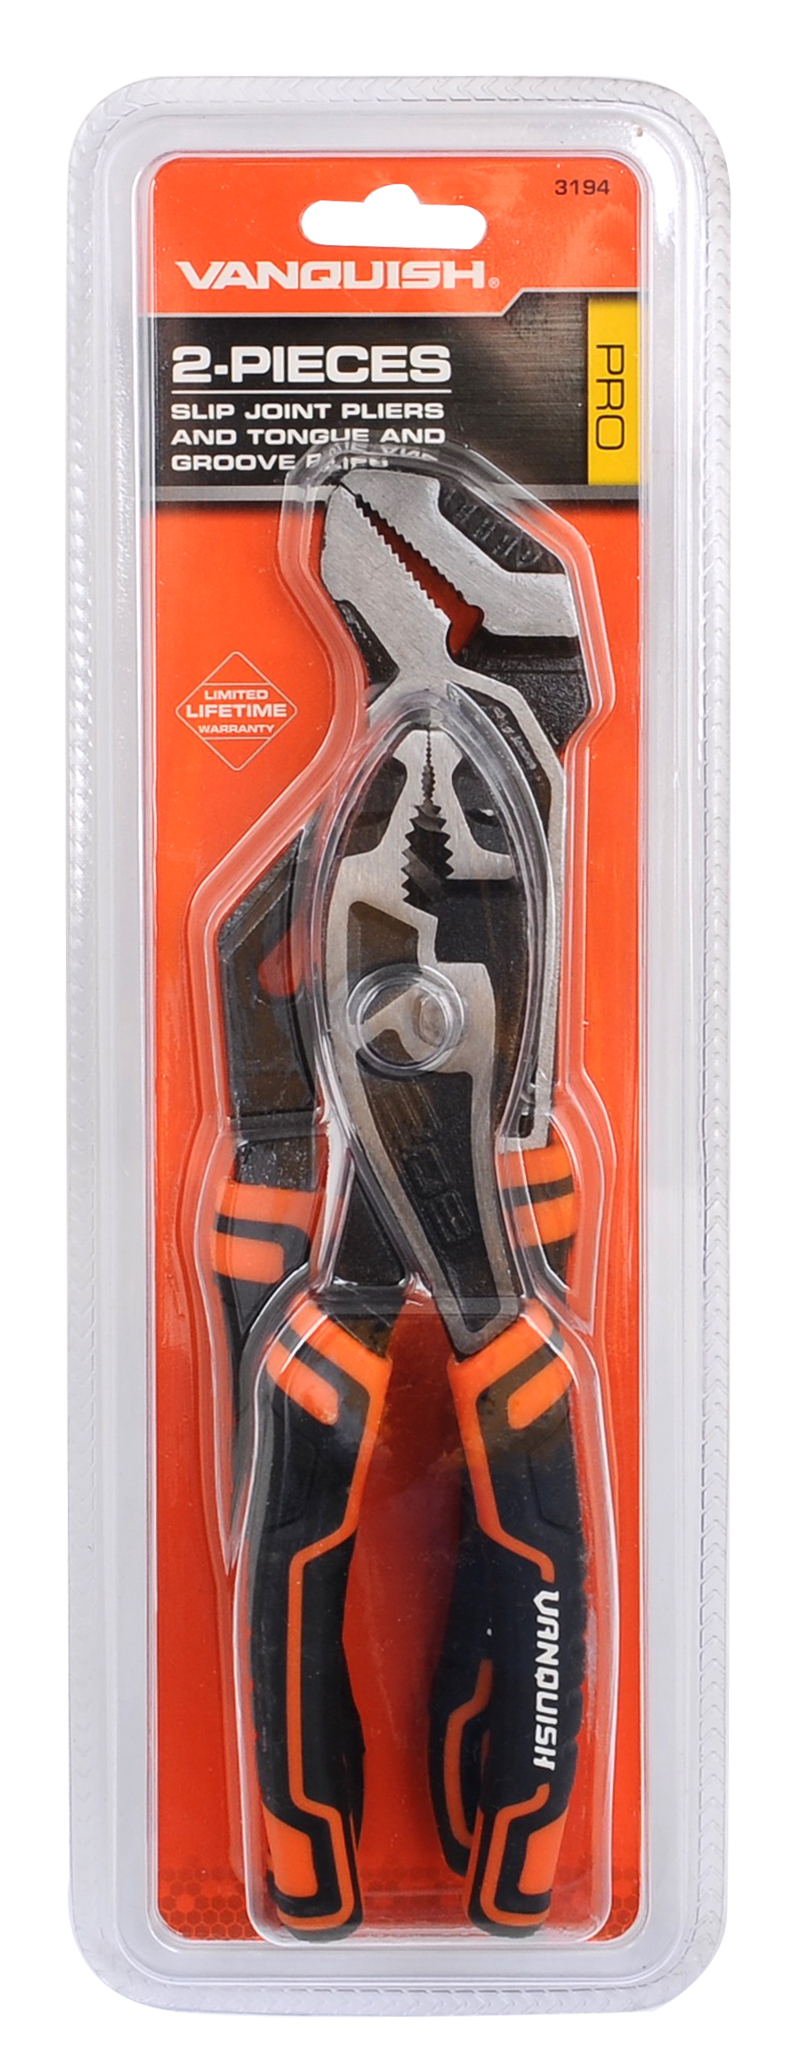 2-PIECES SLIP JOINT PLIERS AND TONGUE AND GROOVE PLIER